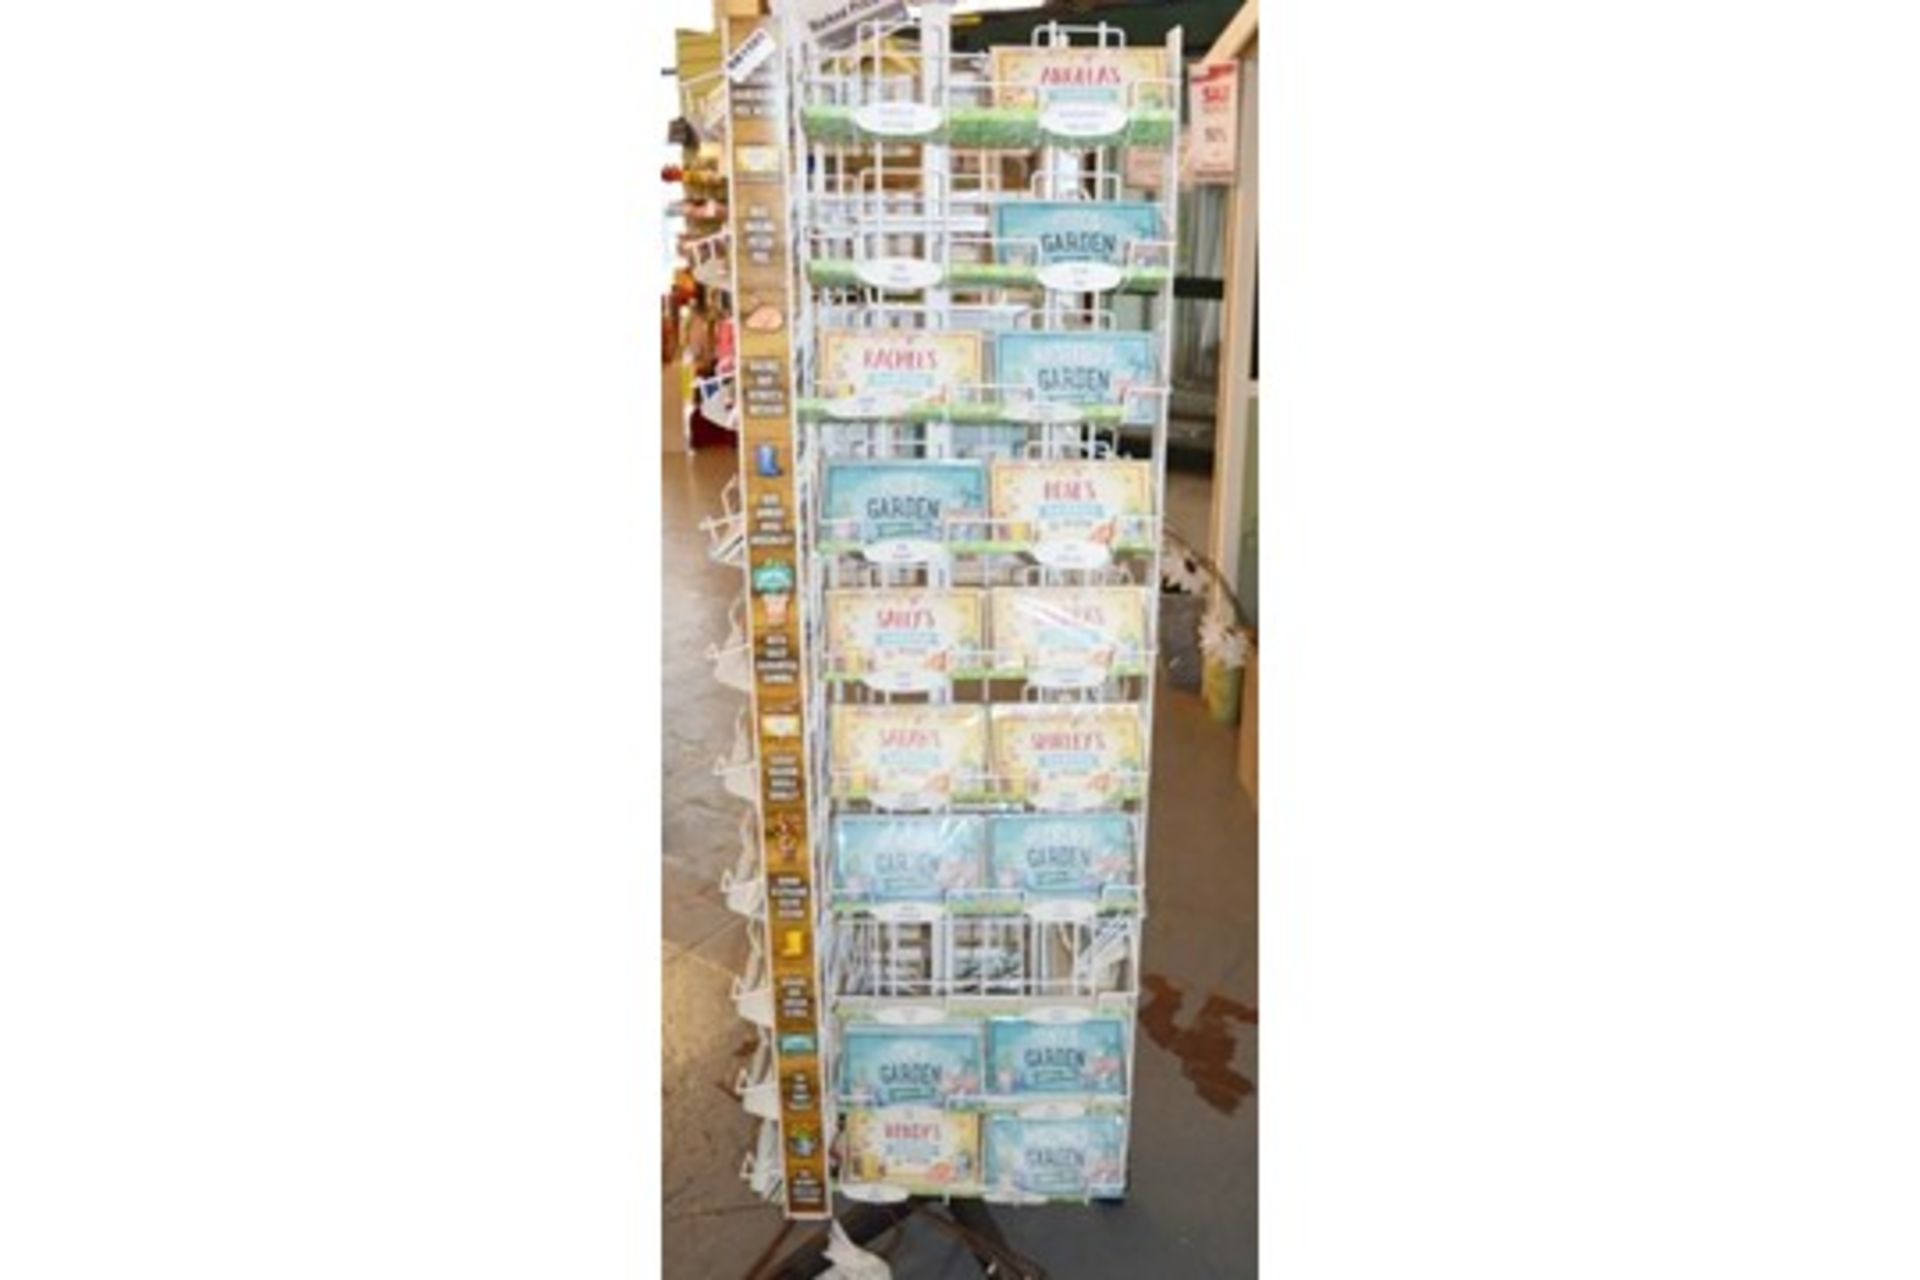 27 x Retail Carousel Display Stands With Approximately 2,800 Items of Resale Stock - Includes - Image 15 of 61